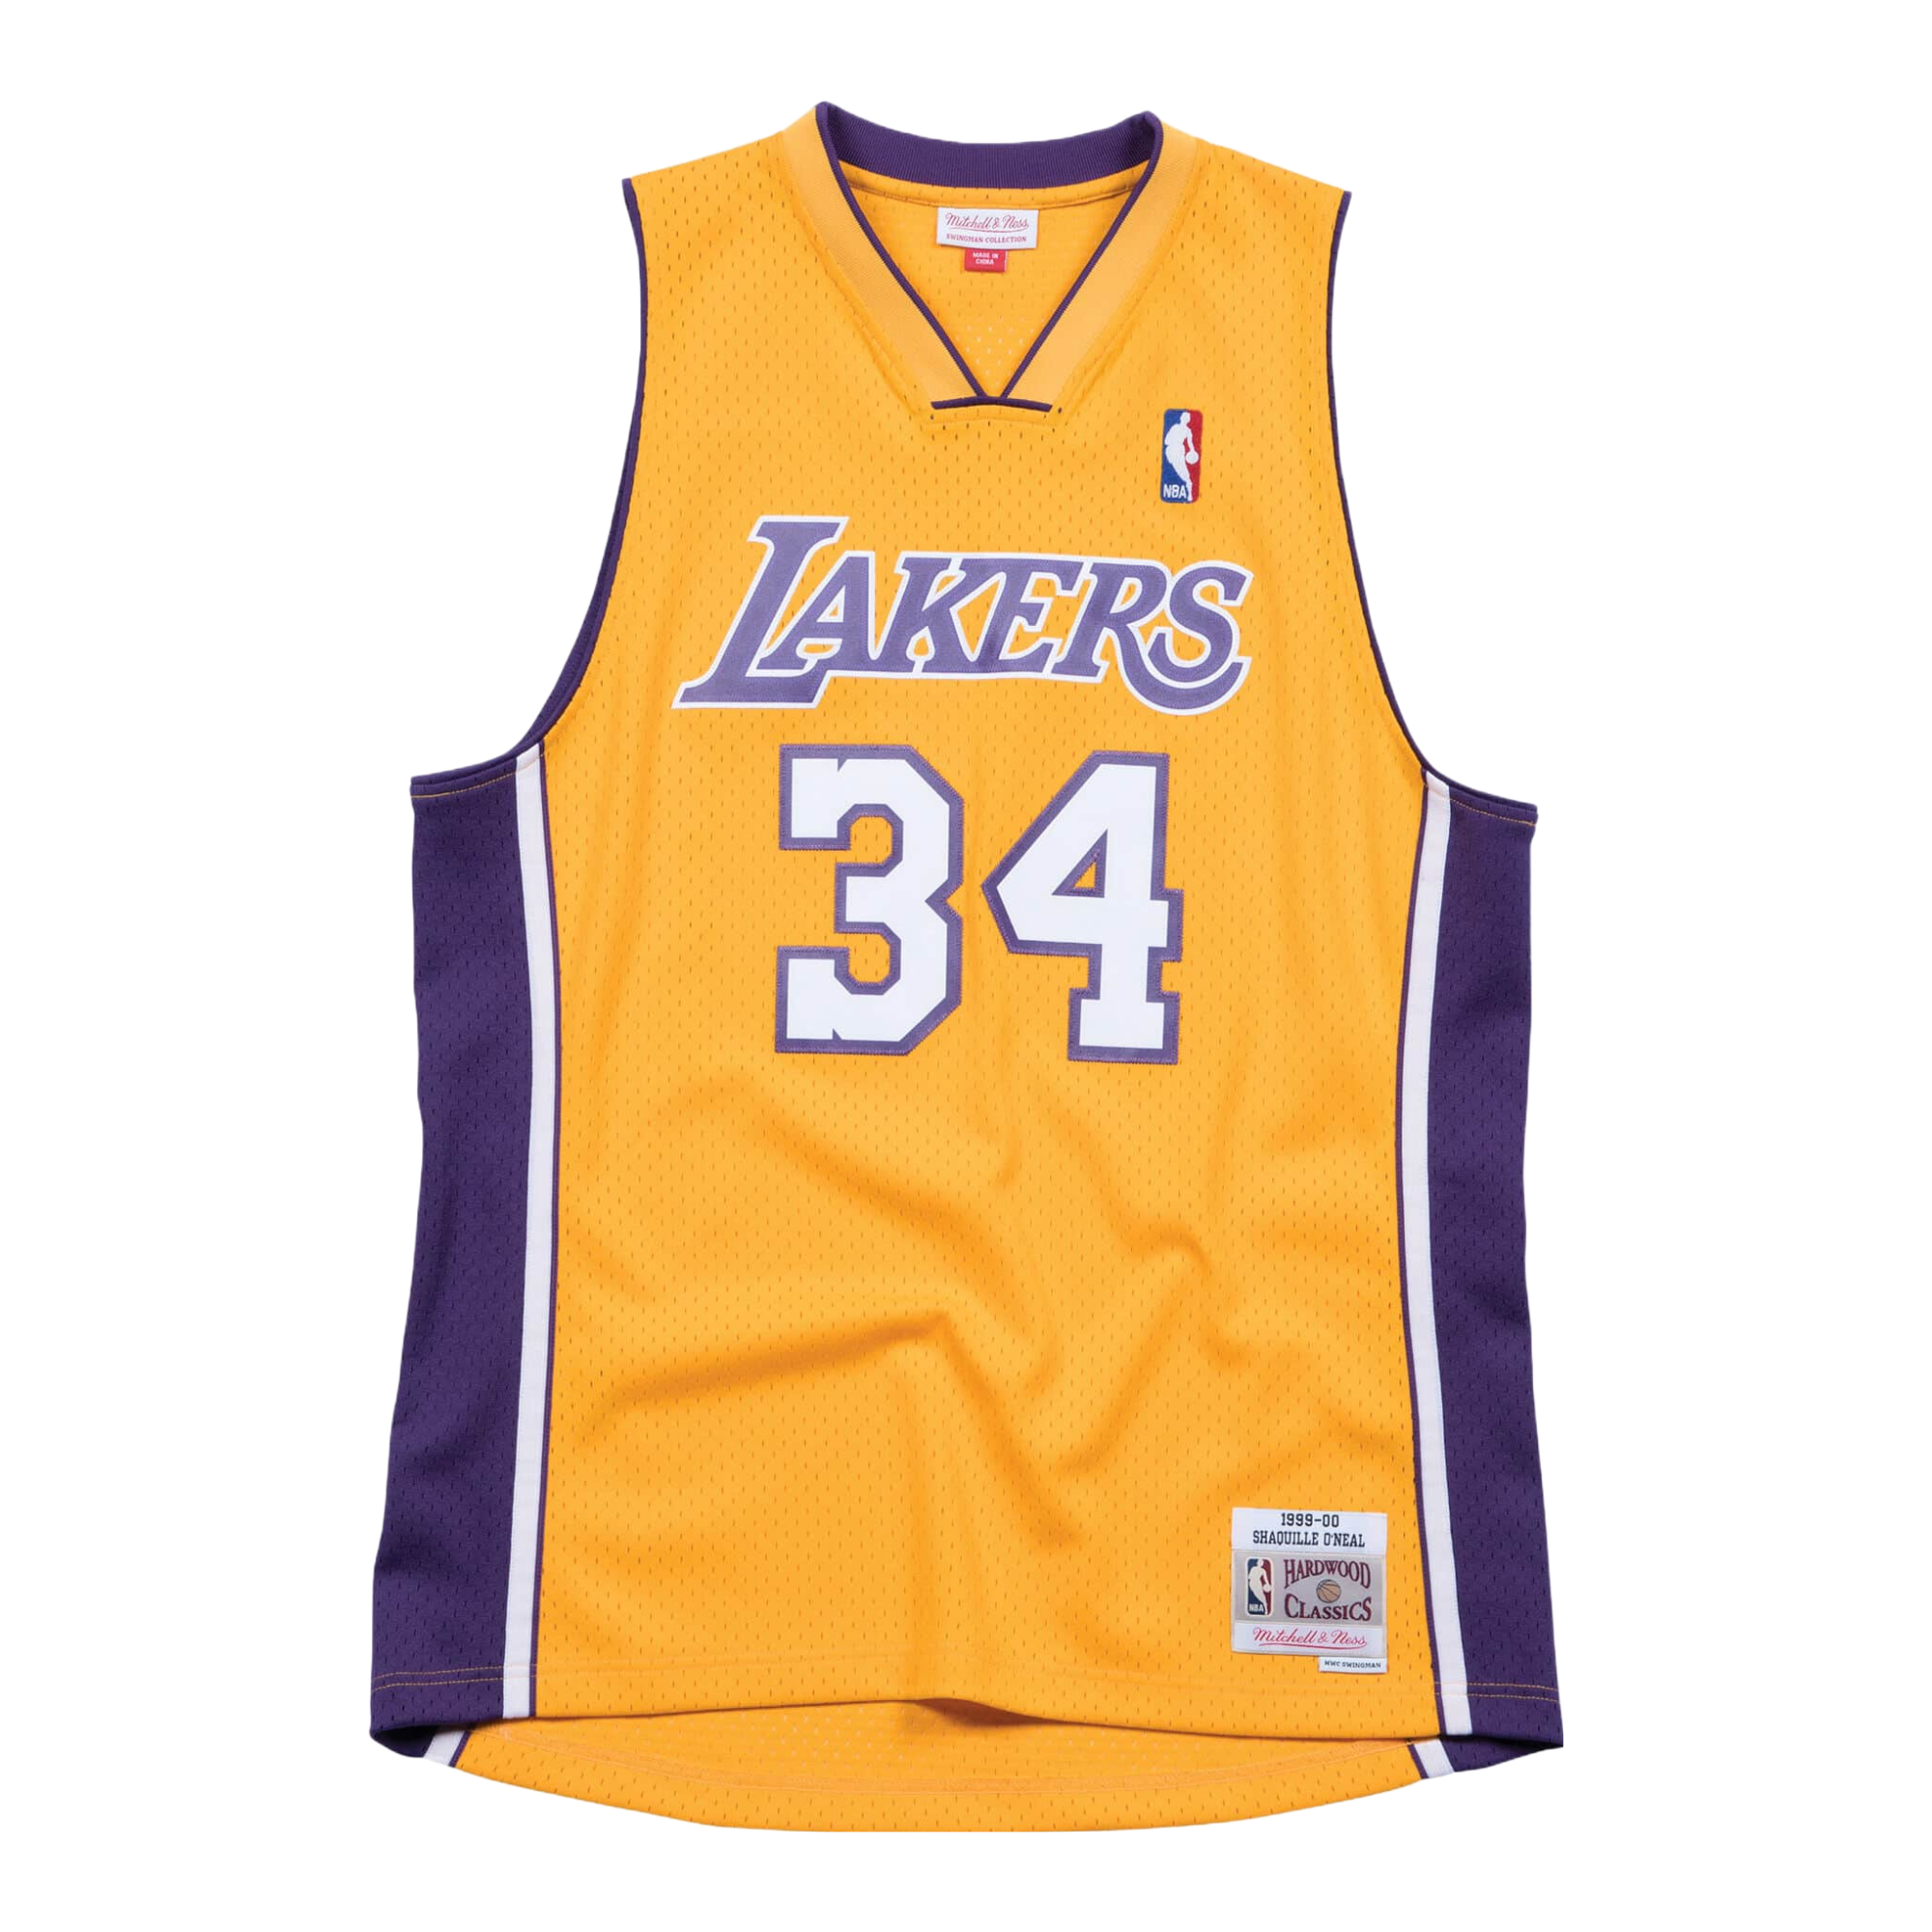 Mitchell & Ness Swingman Jersey Los Angeles Lakers 99/00 Shaquille O'Neal